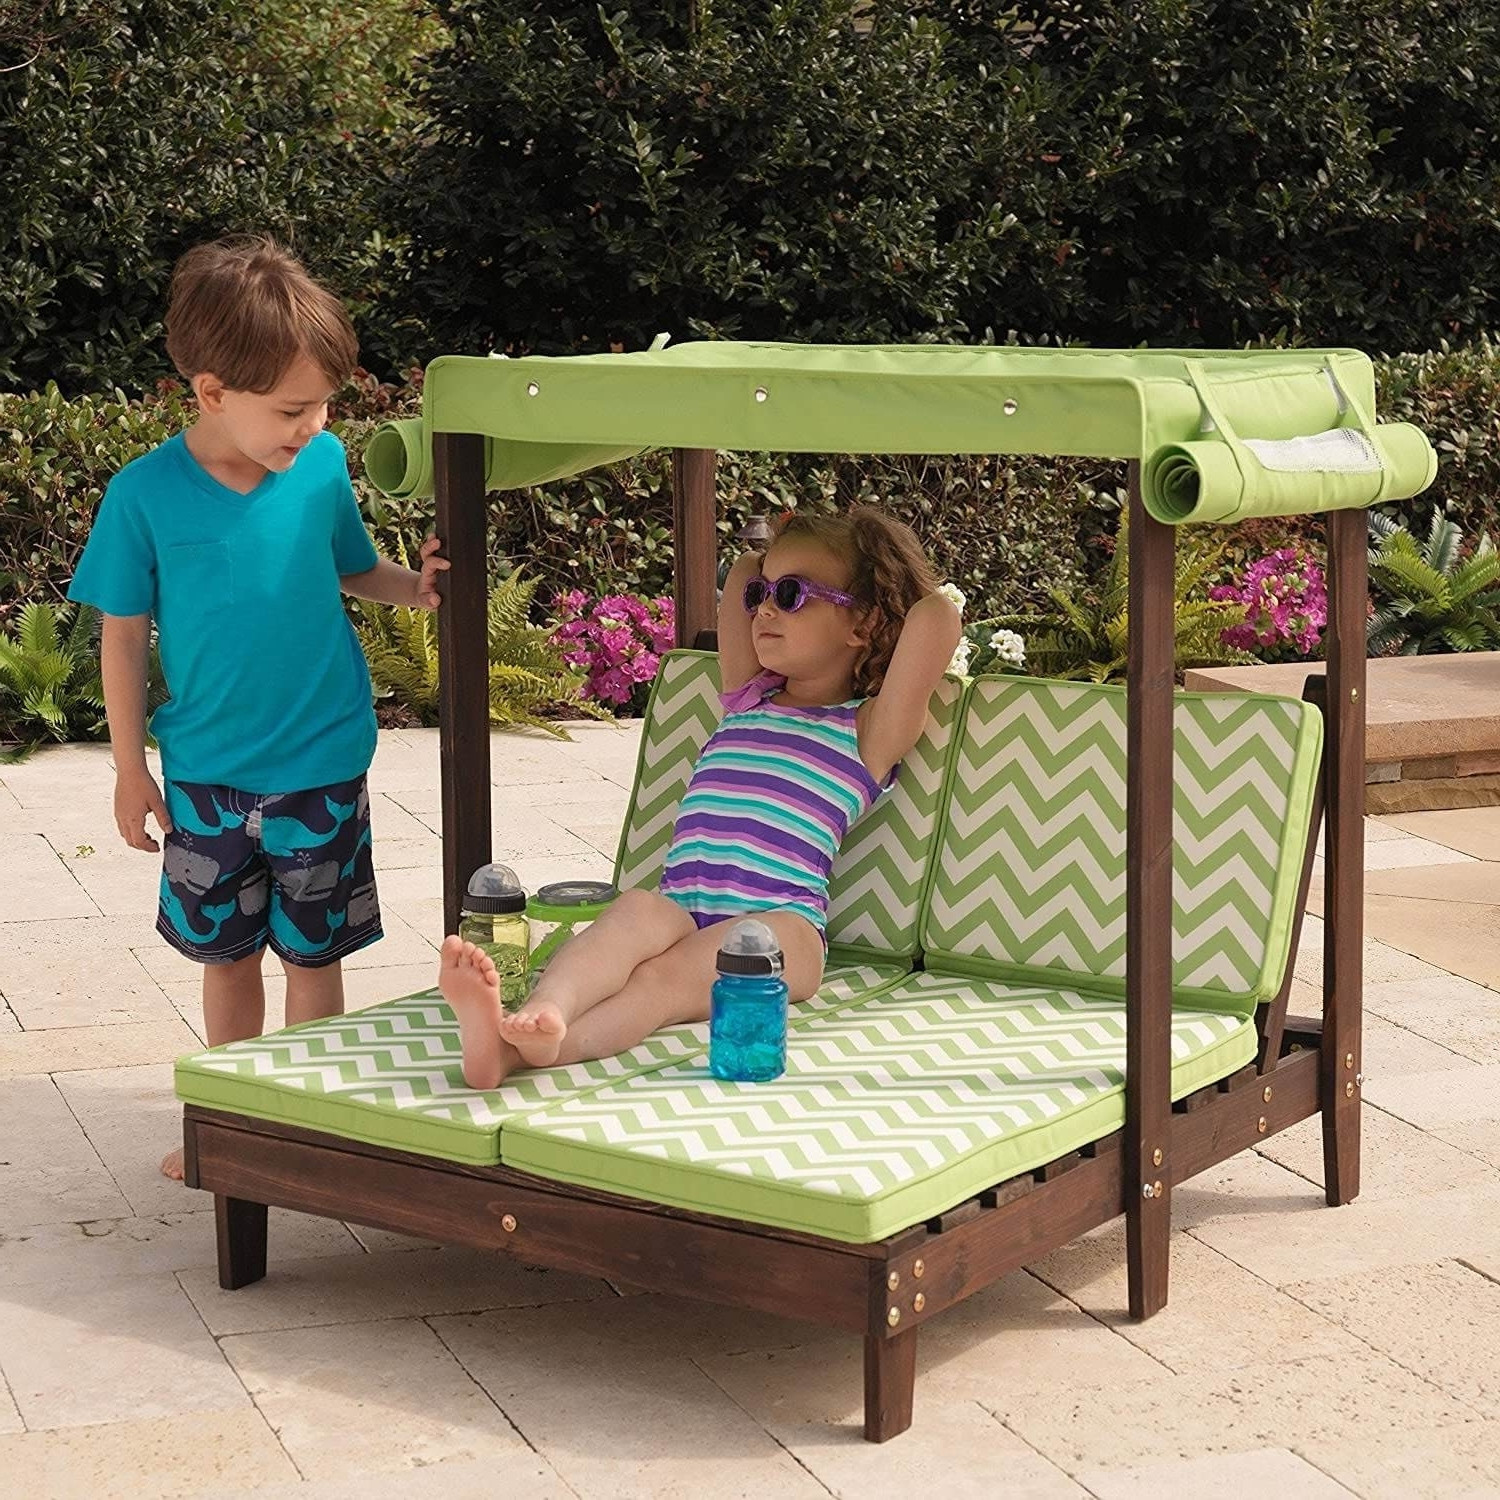 Kids Outdoor Lounge Chair
 15 Best Collection of Children s Outdoor Chaise Lounge Chairs